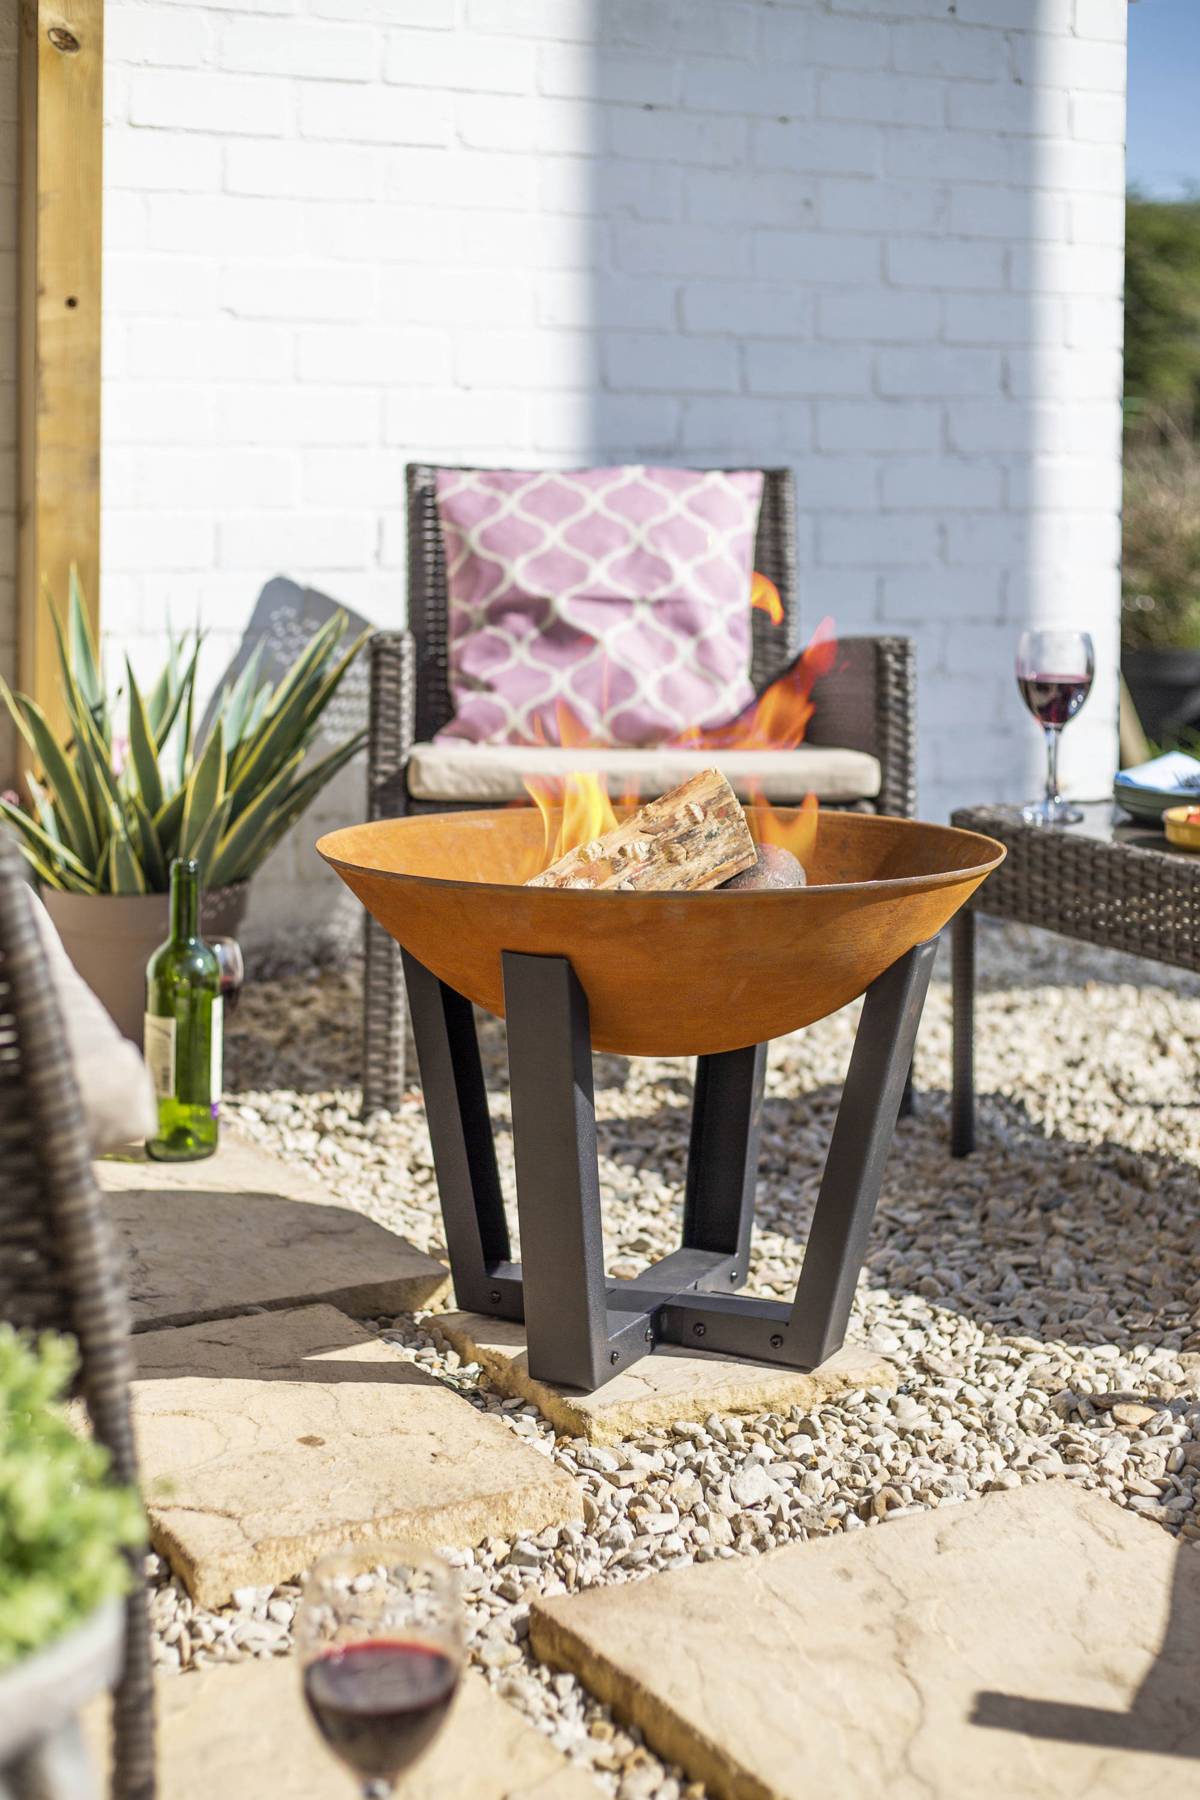 Small Icarus Cast Iron Garden Firepit